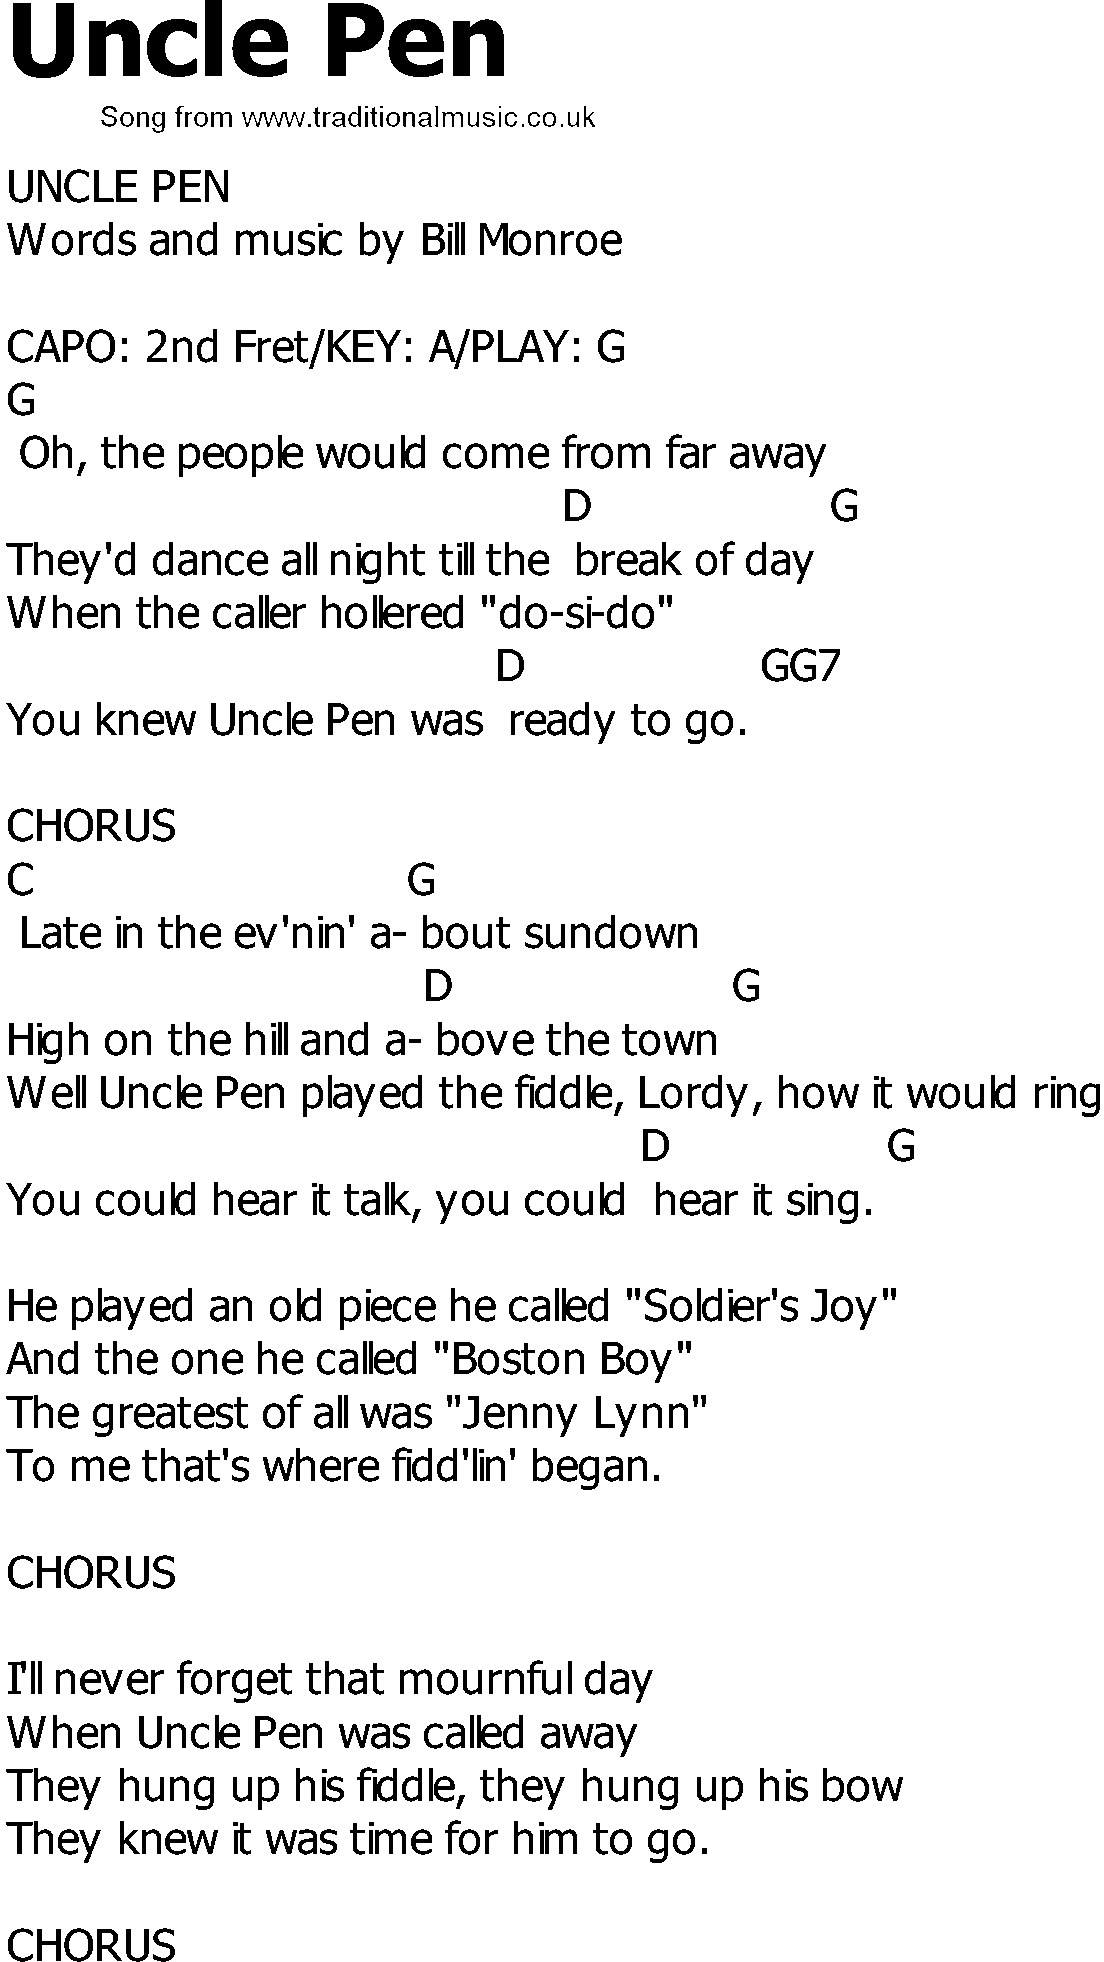 Old Country song lyrics with chords - Uncle Pen